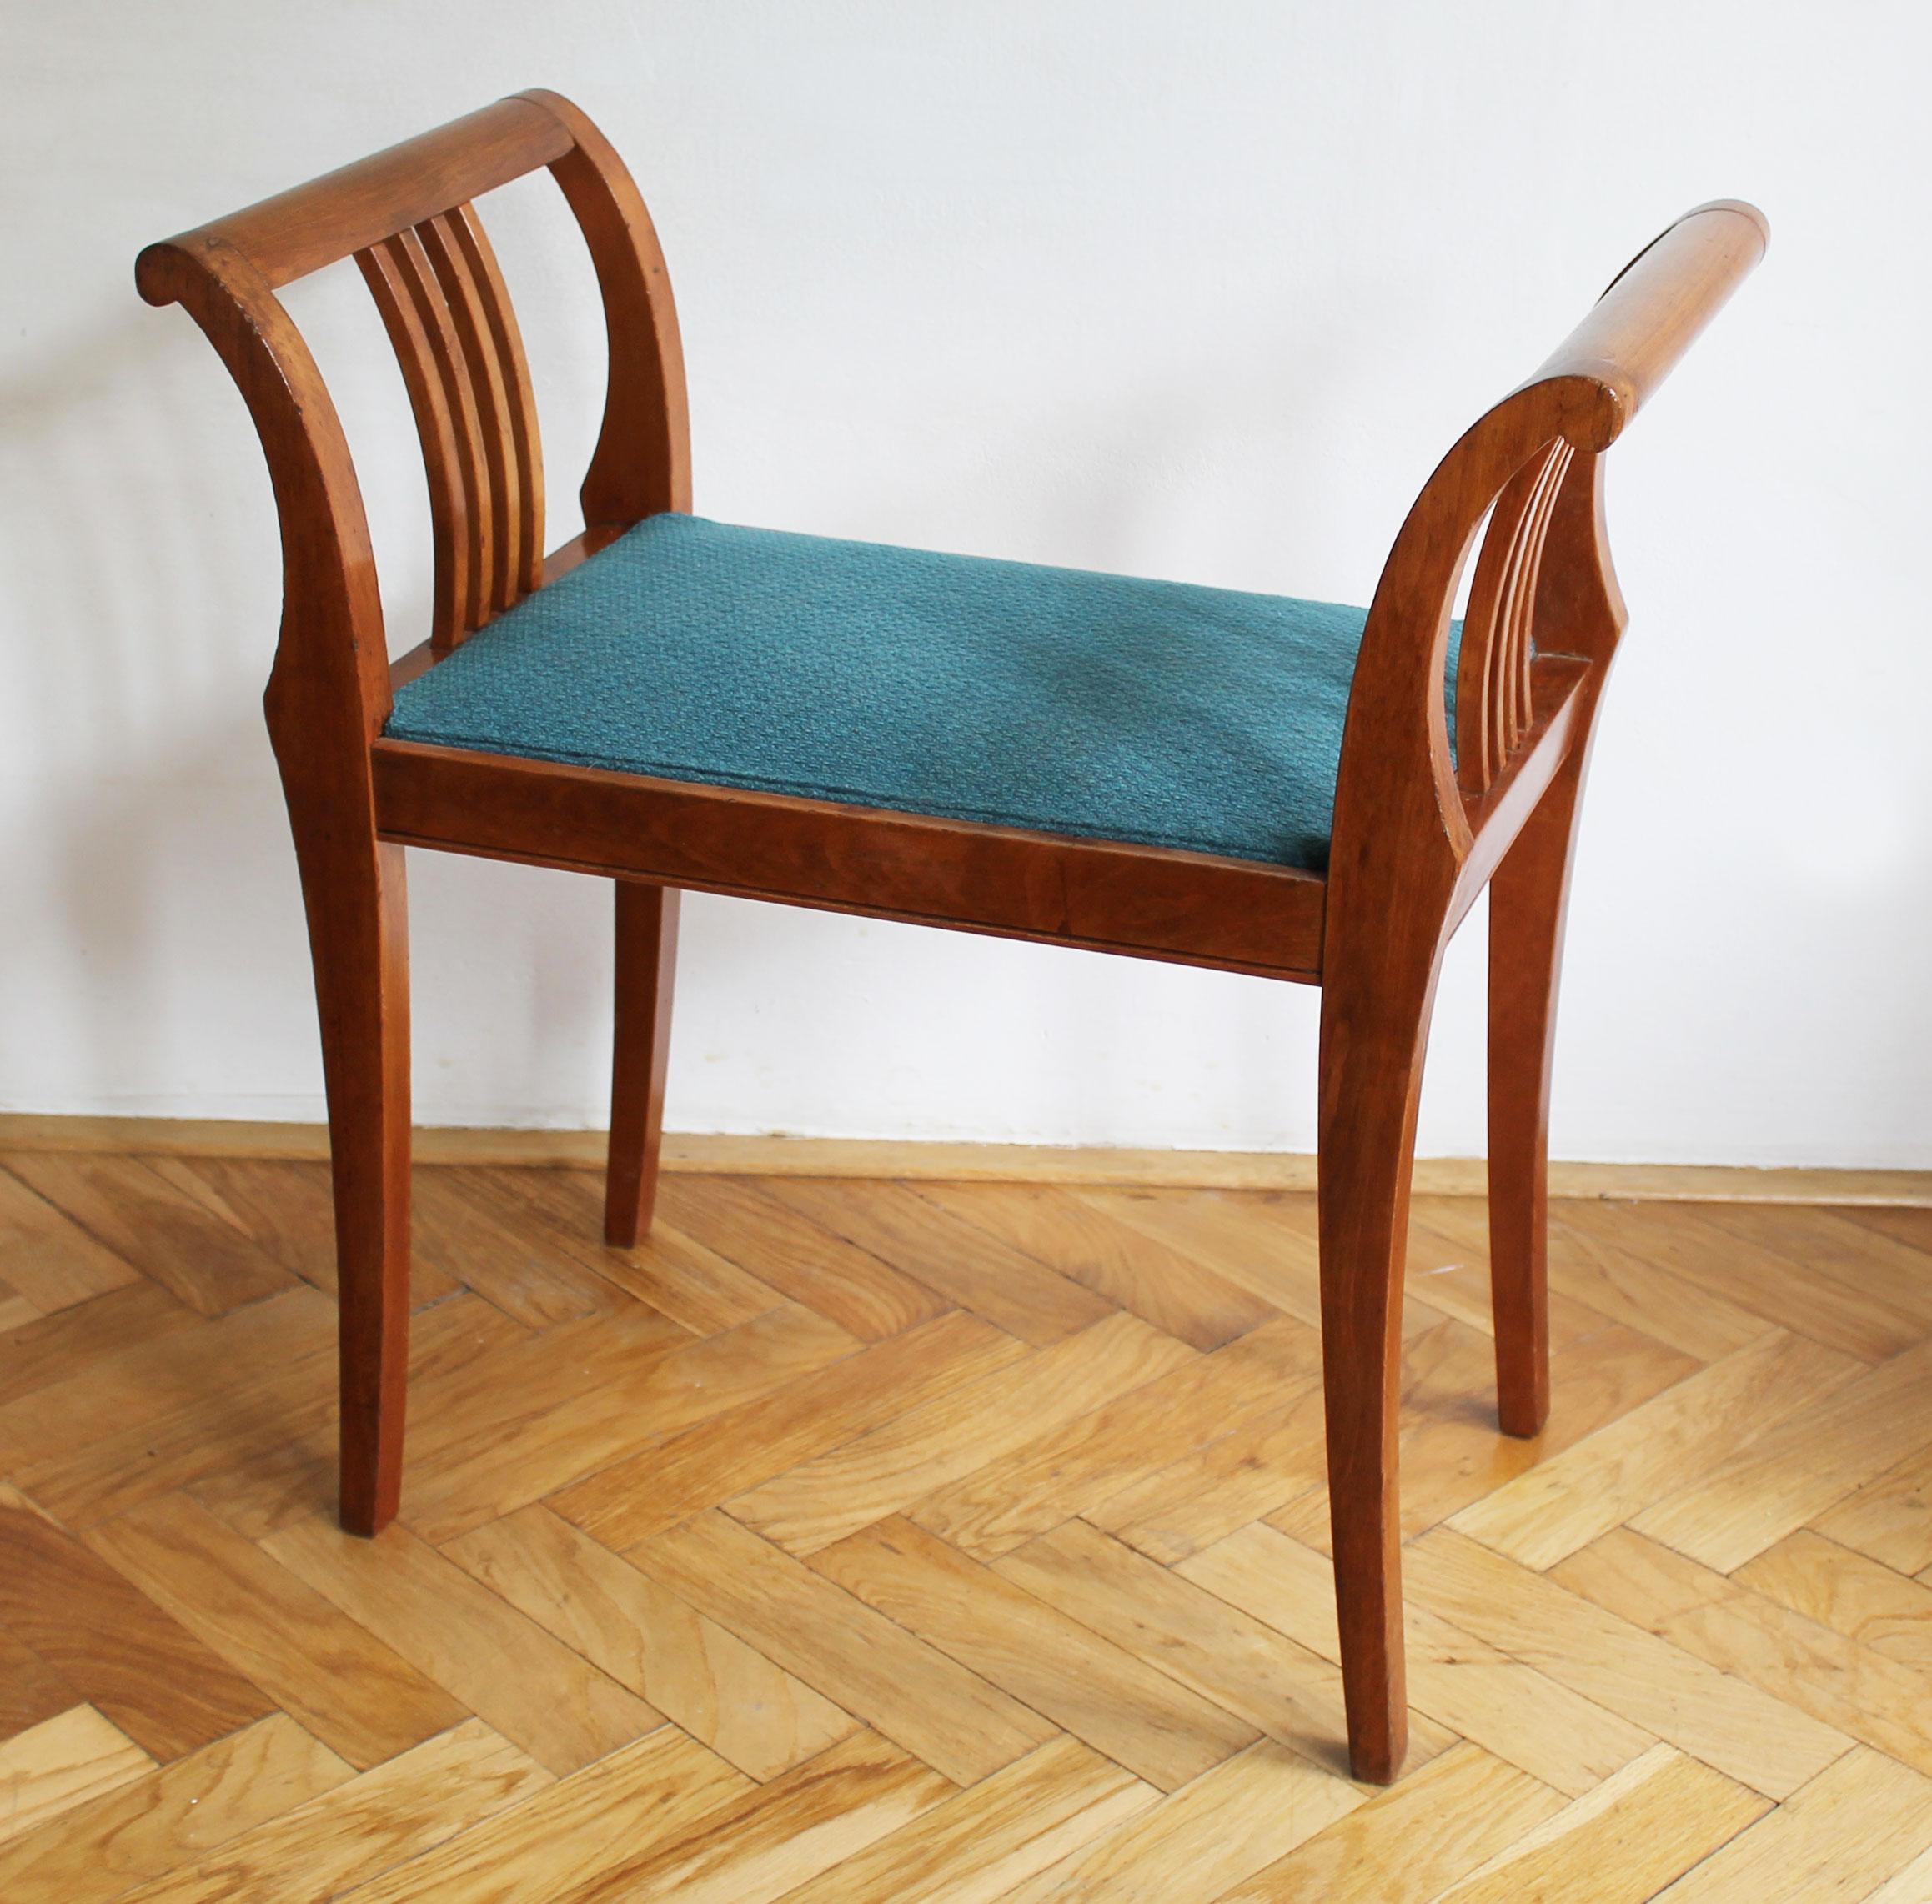 1920's Art Deco Tabouret In Good Condition For Sale In Brno, CZ